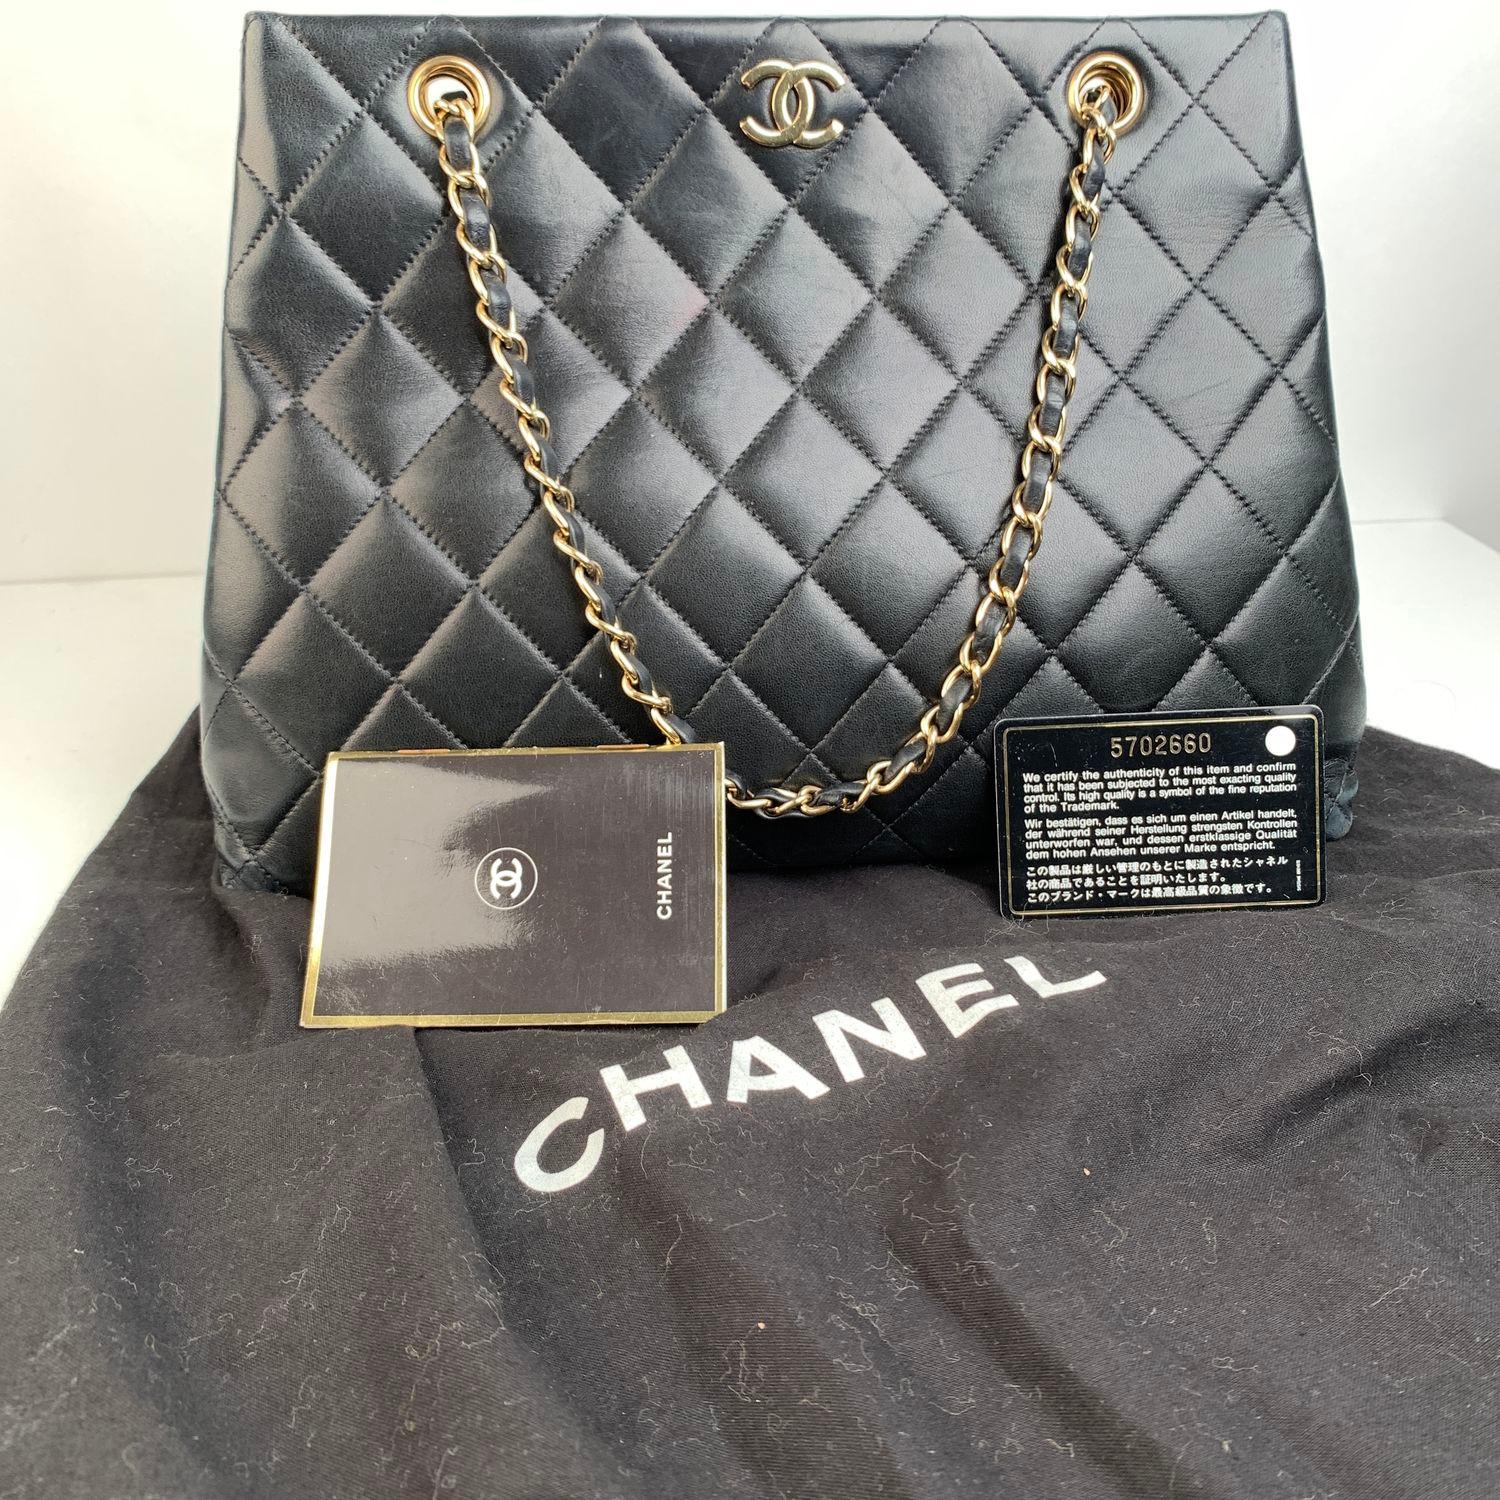 Sophisticated black quilted leather shoulder bag by CHANEL with double gold metal chain and interwoven leather shoulder straps. Gold metal CC - CHANEL logo on the front. The bag features upper magnetic button closure, leather lining, 1 side zip